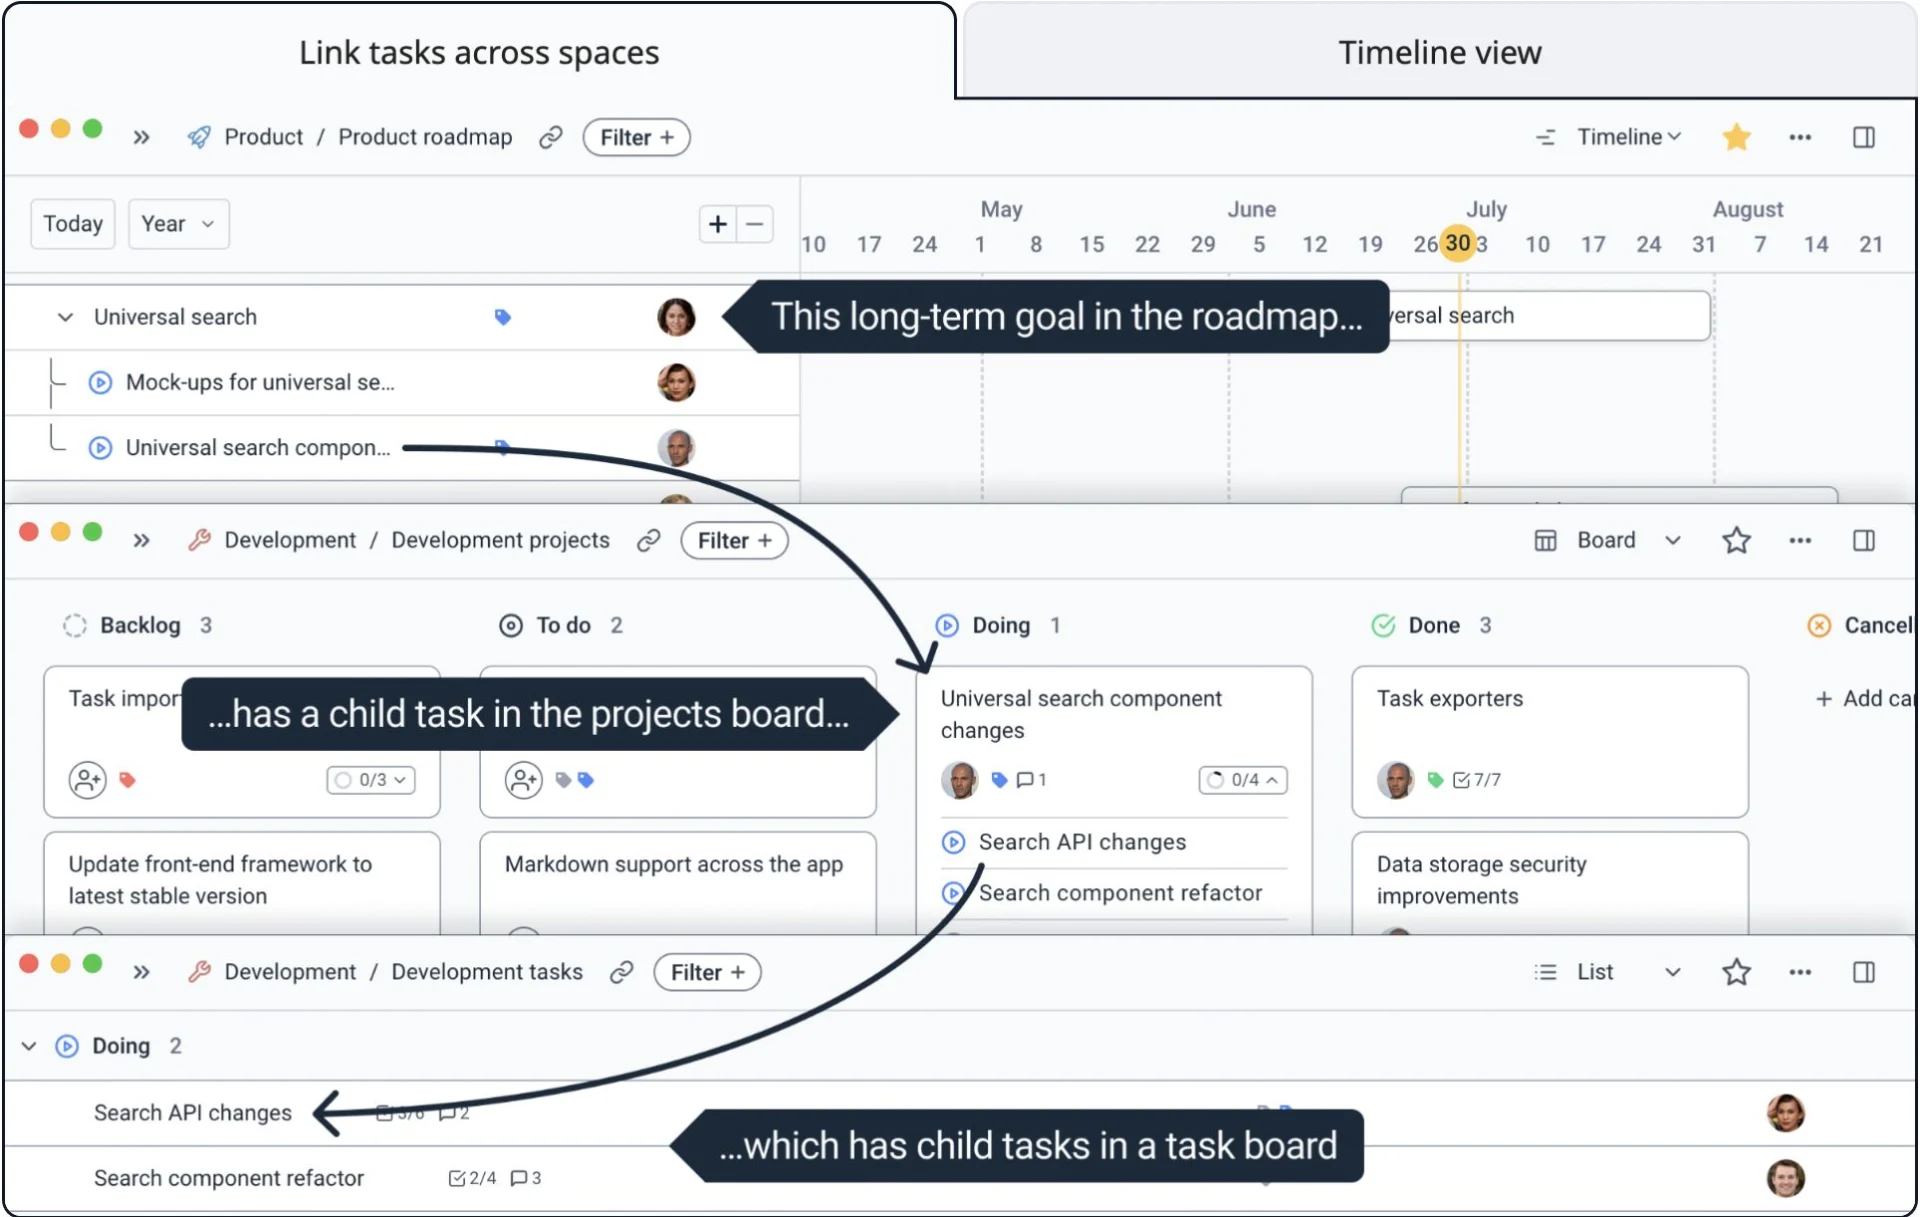 Superthread task linking and timelines.